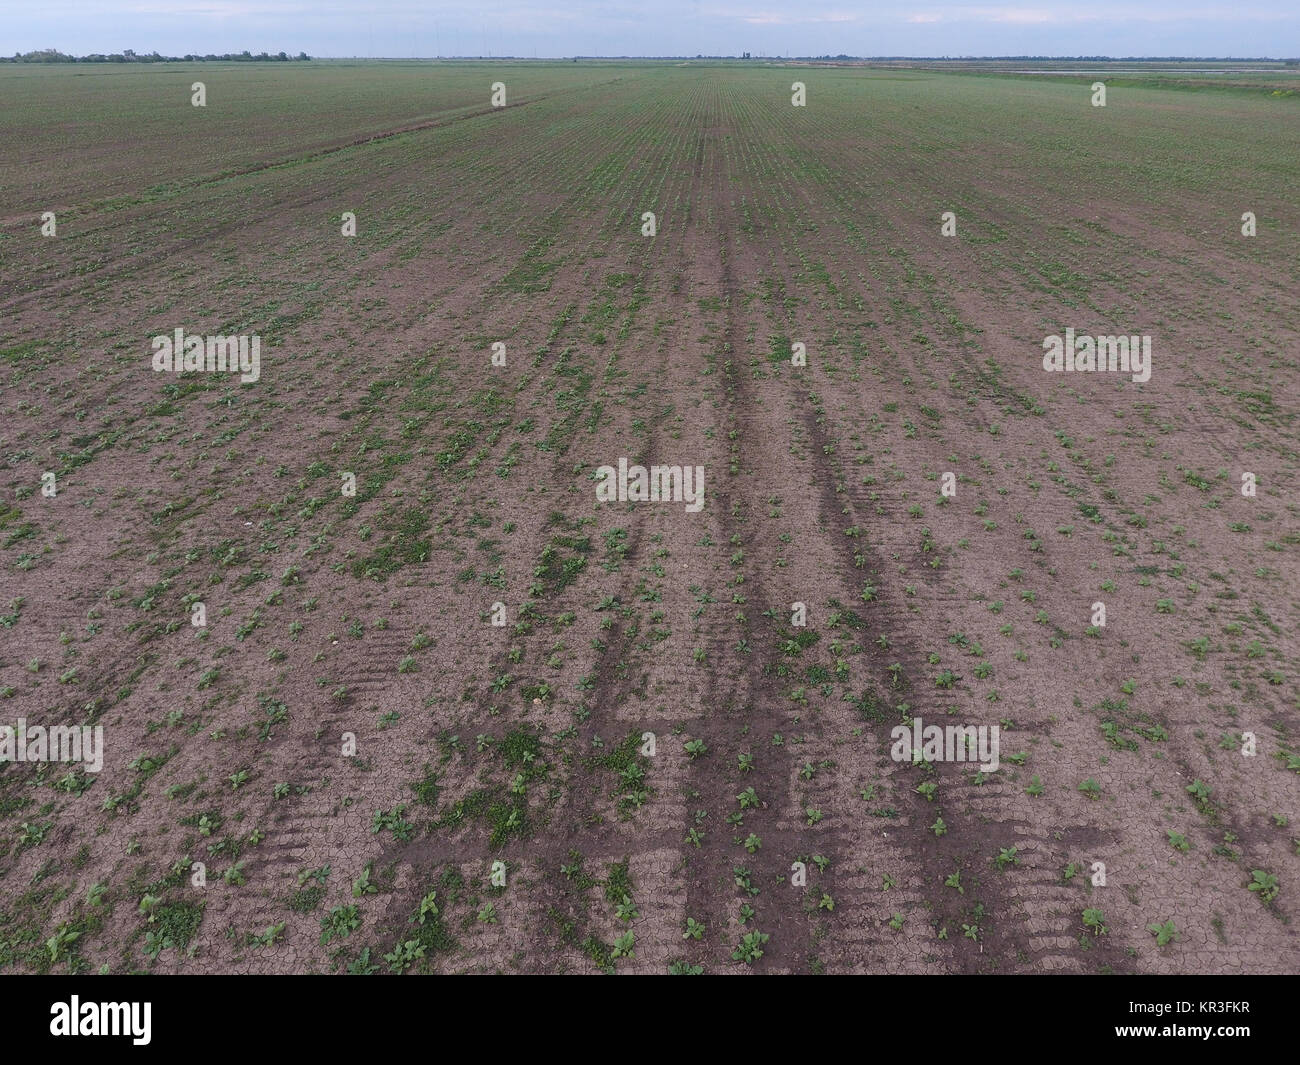 Top view of a field of sunflower seedlings Stock Photo